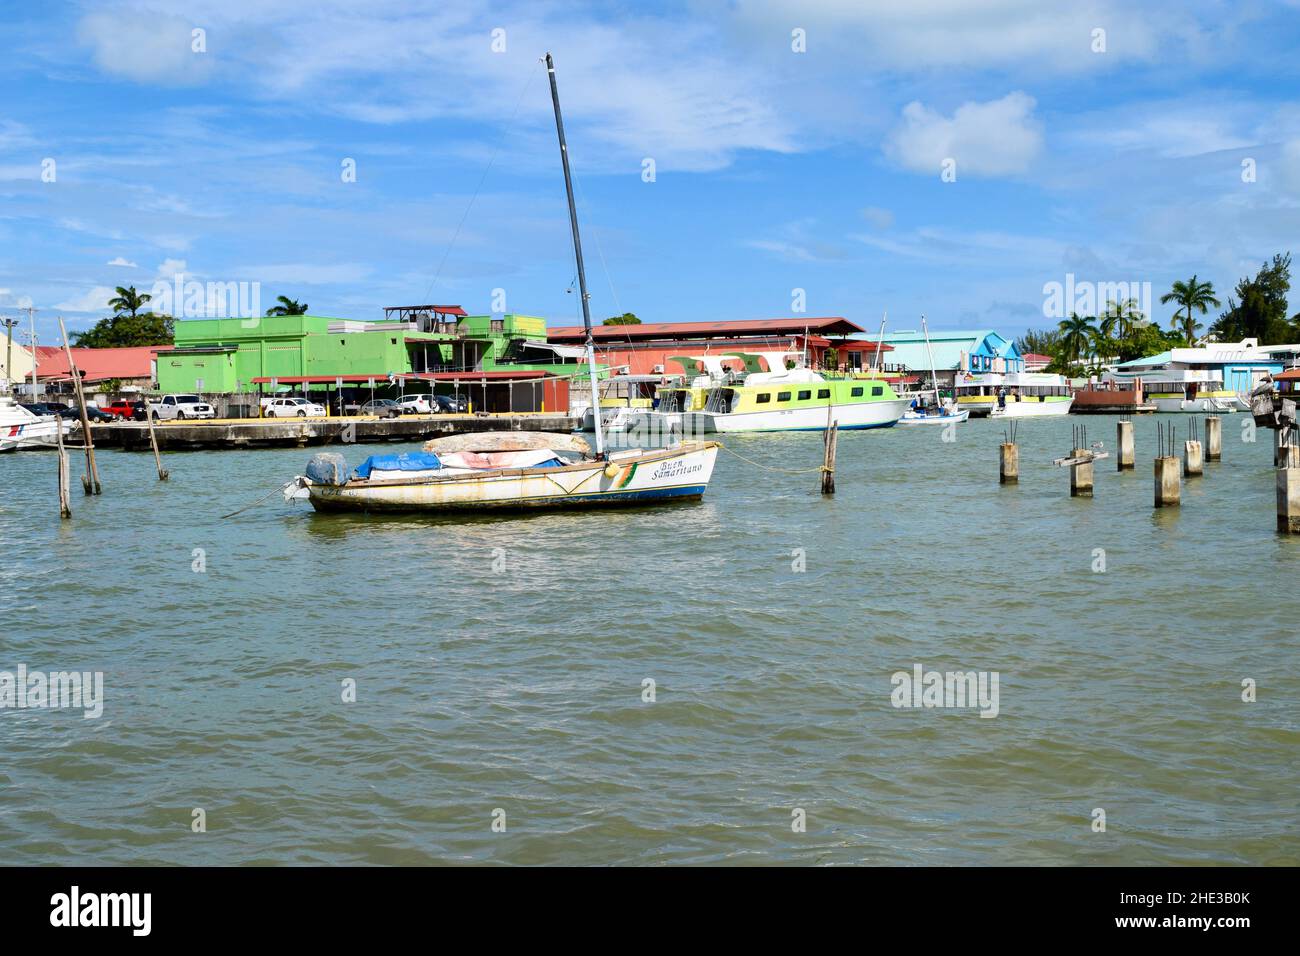 The San Pedro Ocean Ferry terminal at the Belize City harbor Stock Photo